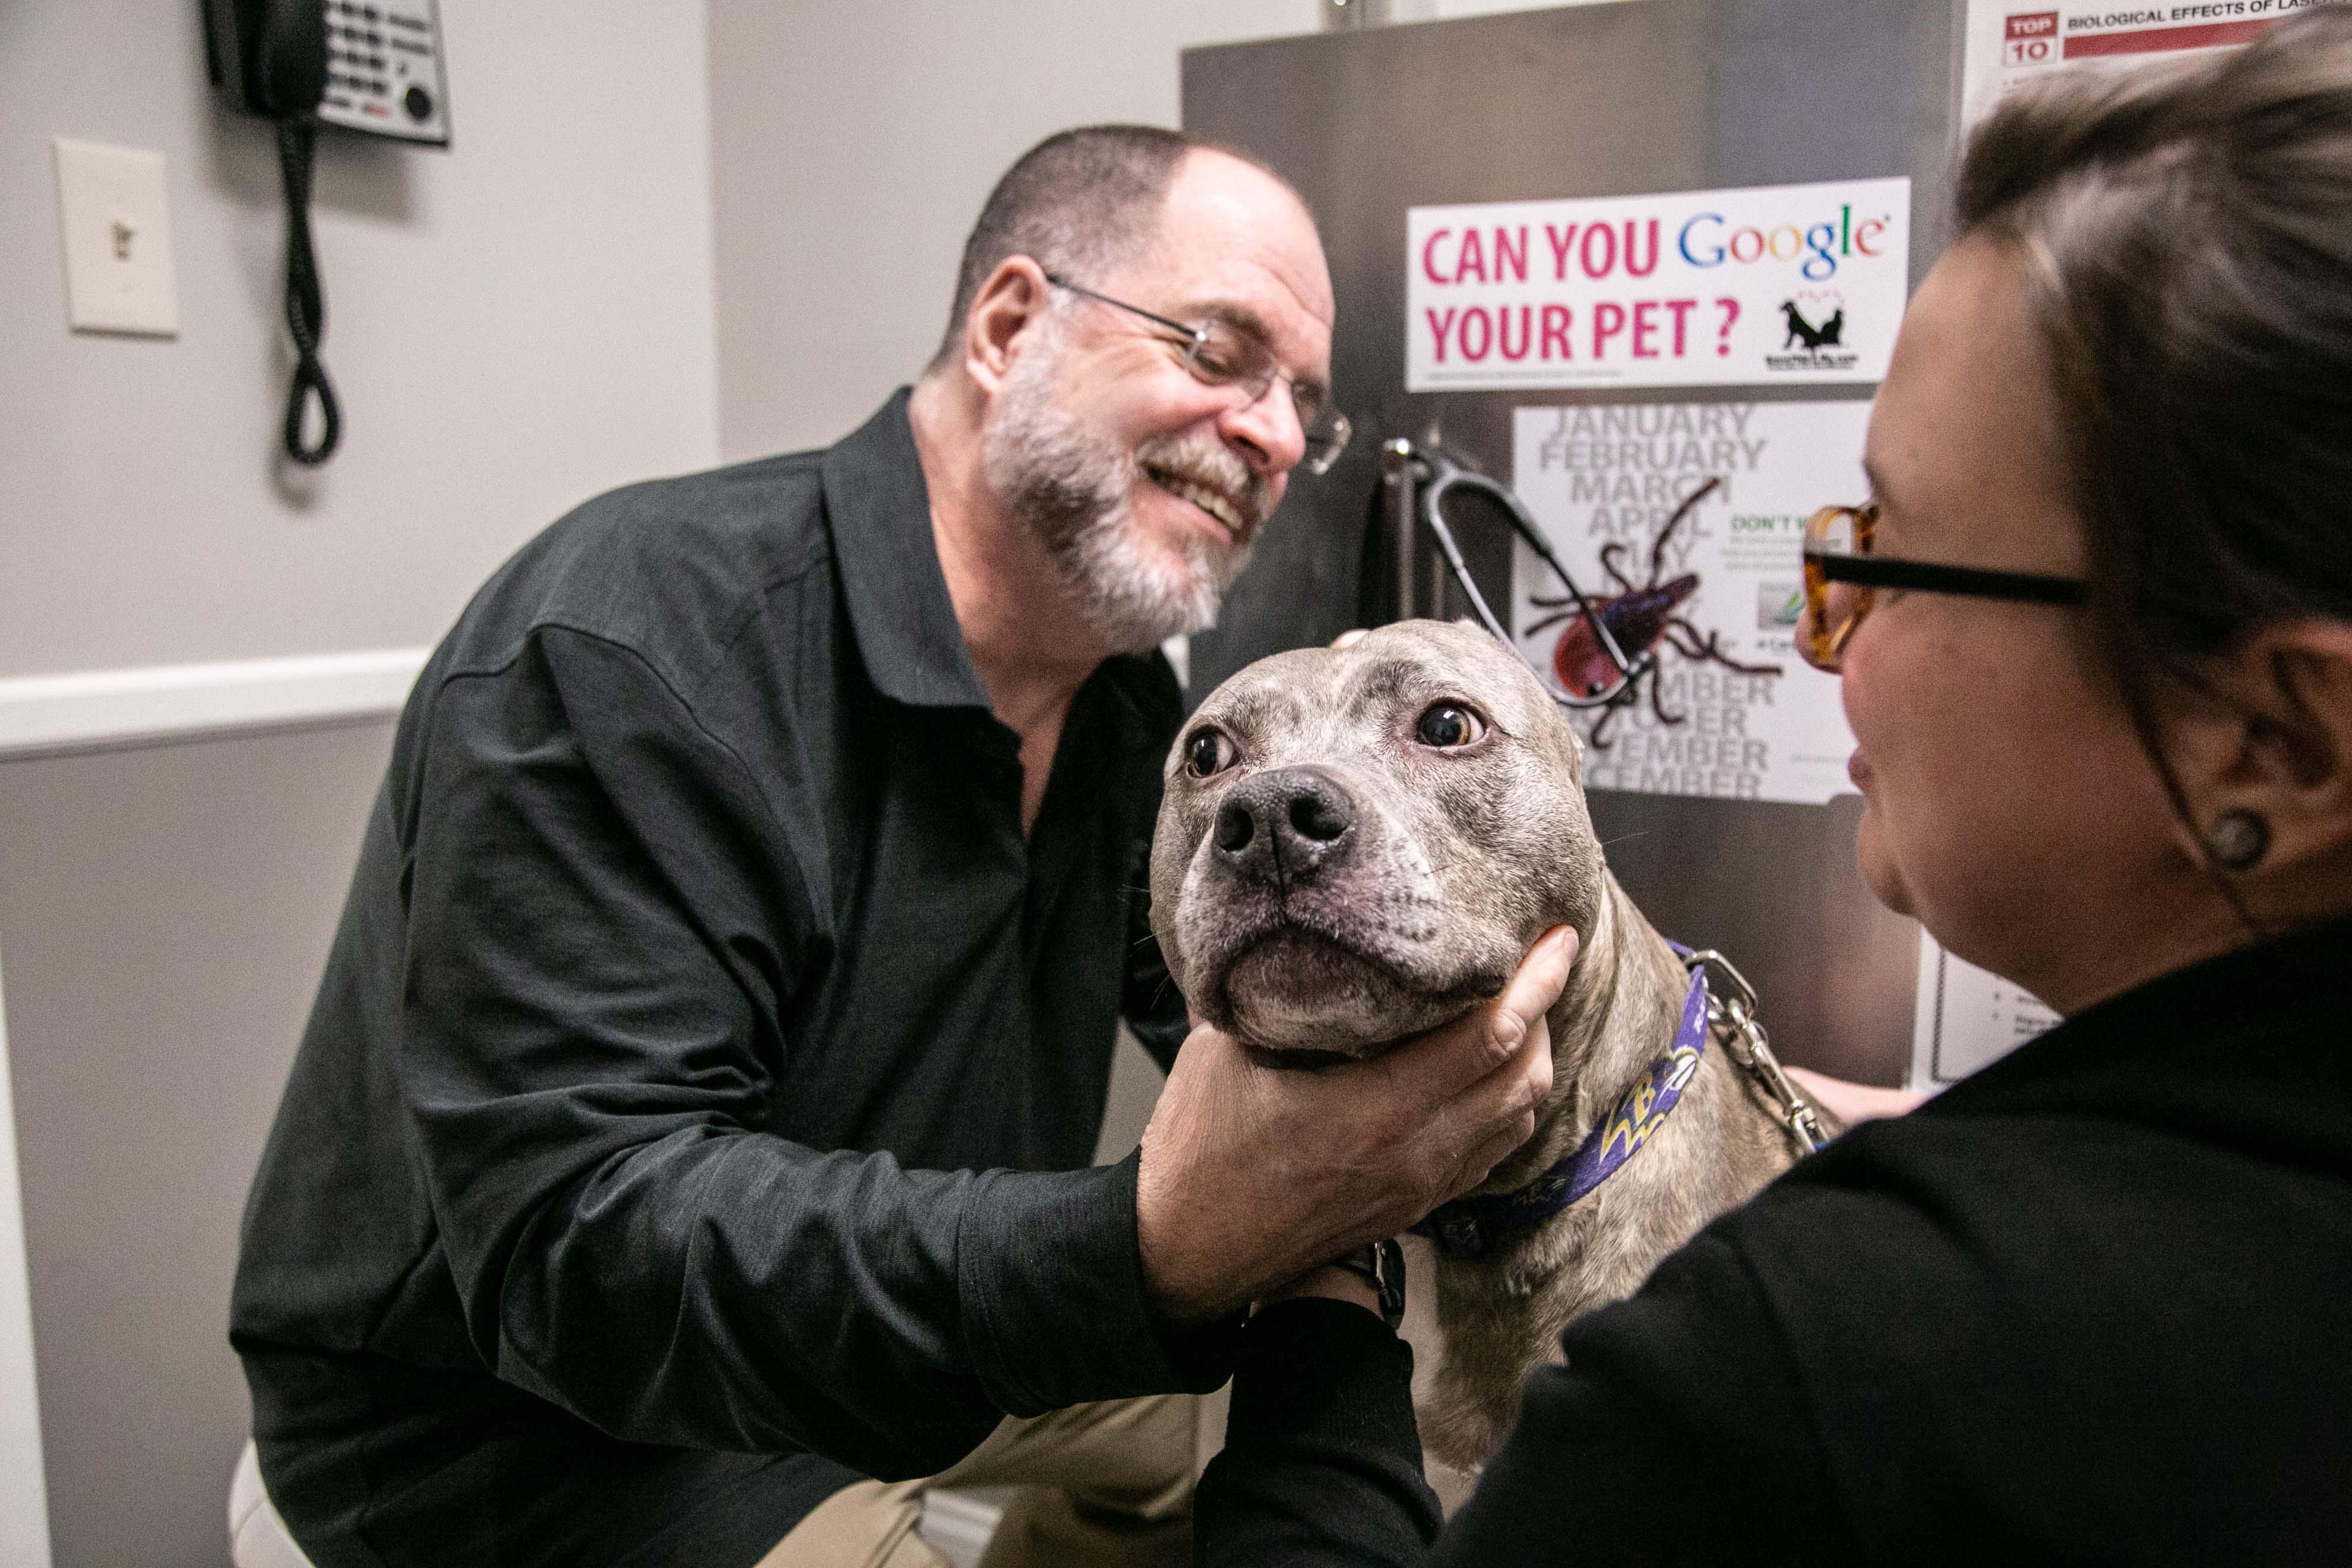 Next on the agenda, ears! Ear infections are common in dogs. We'll check for areas of concern, like infection, inflammation, and the presence of parasites.